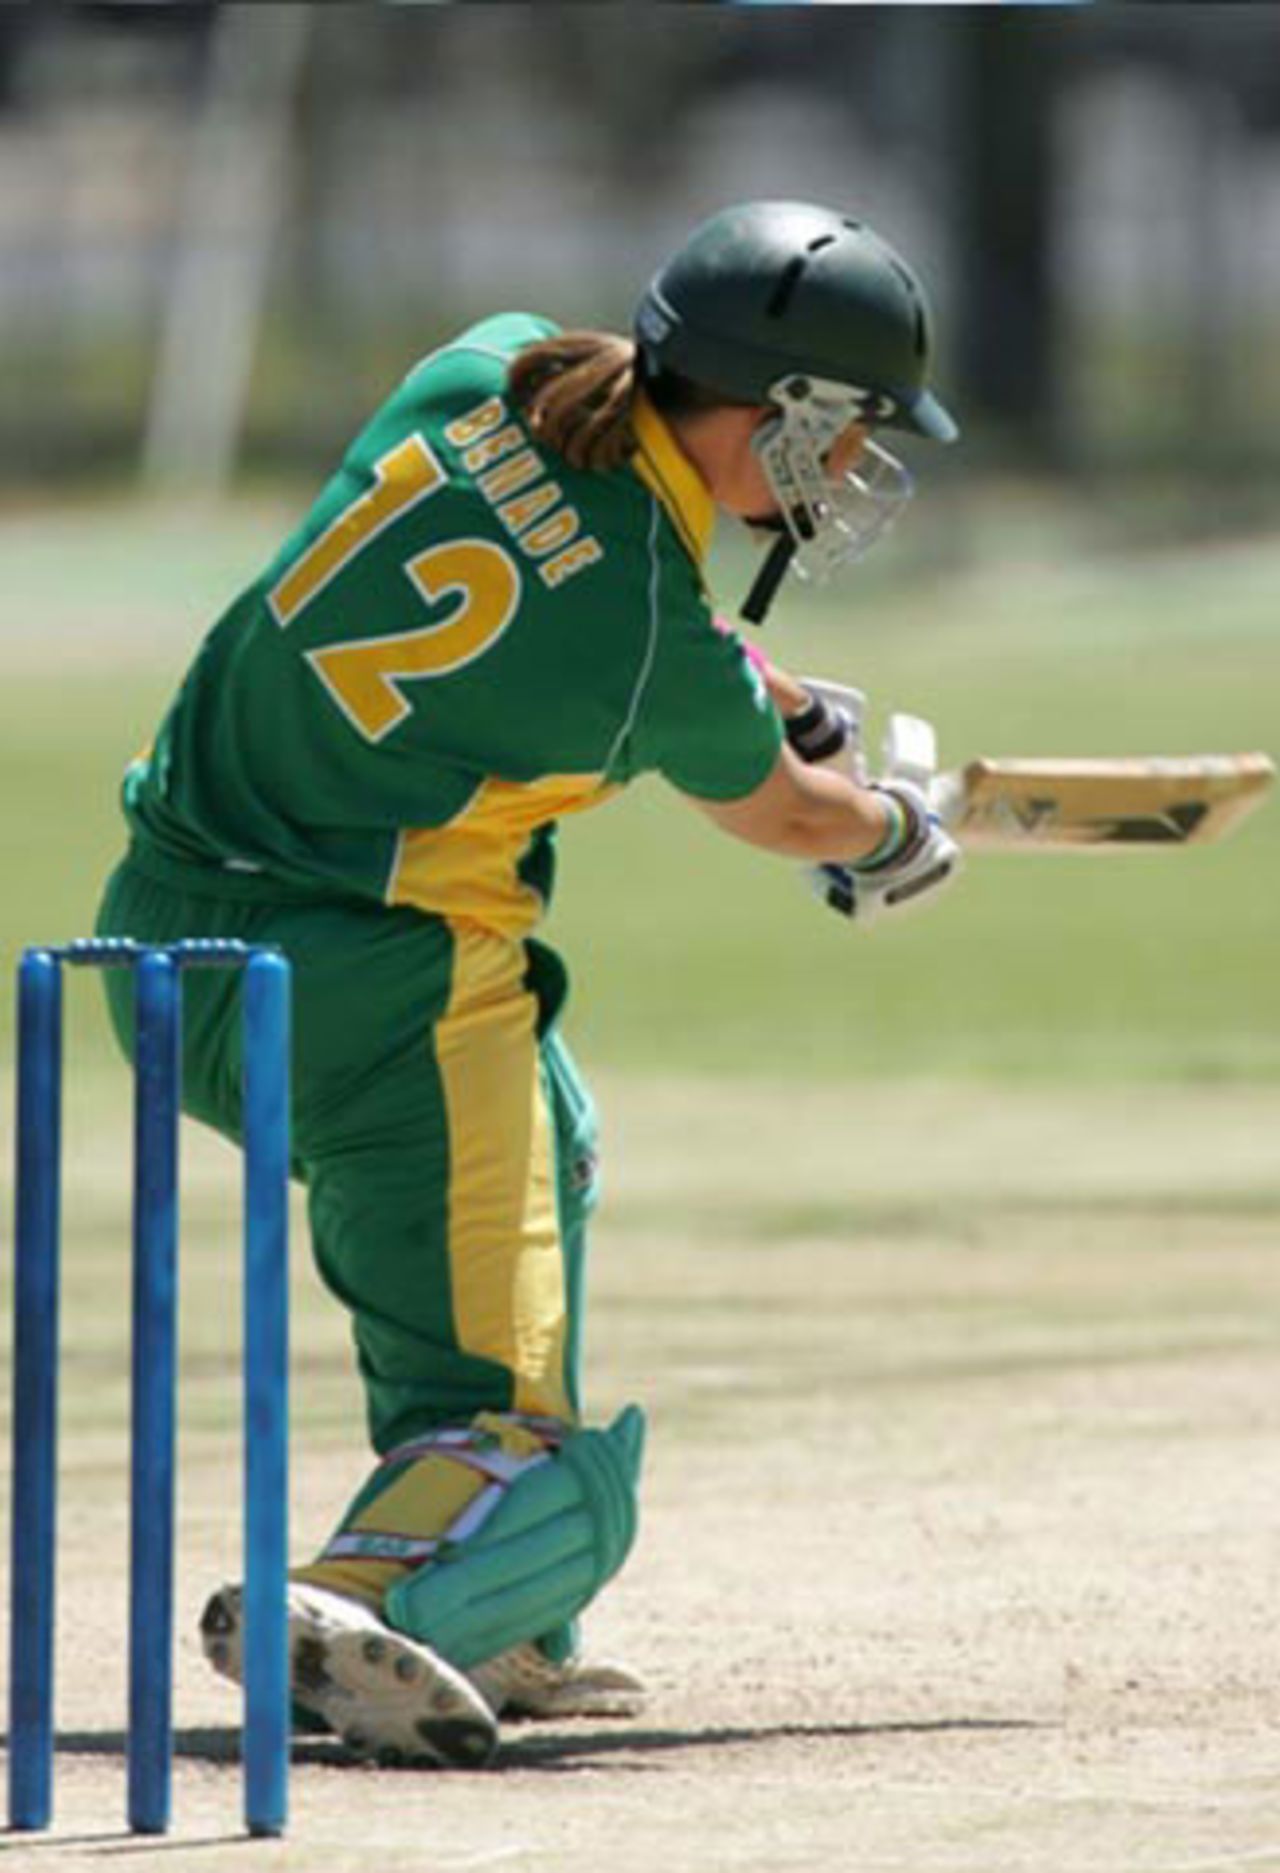 Susan Benade drives to the off side, Papua New Guinea v South Africa, ICC Women's World Cup Qualifier, Stellenbosch, February 19, 2008